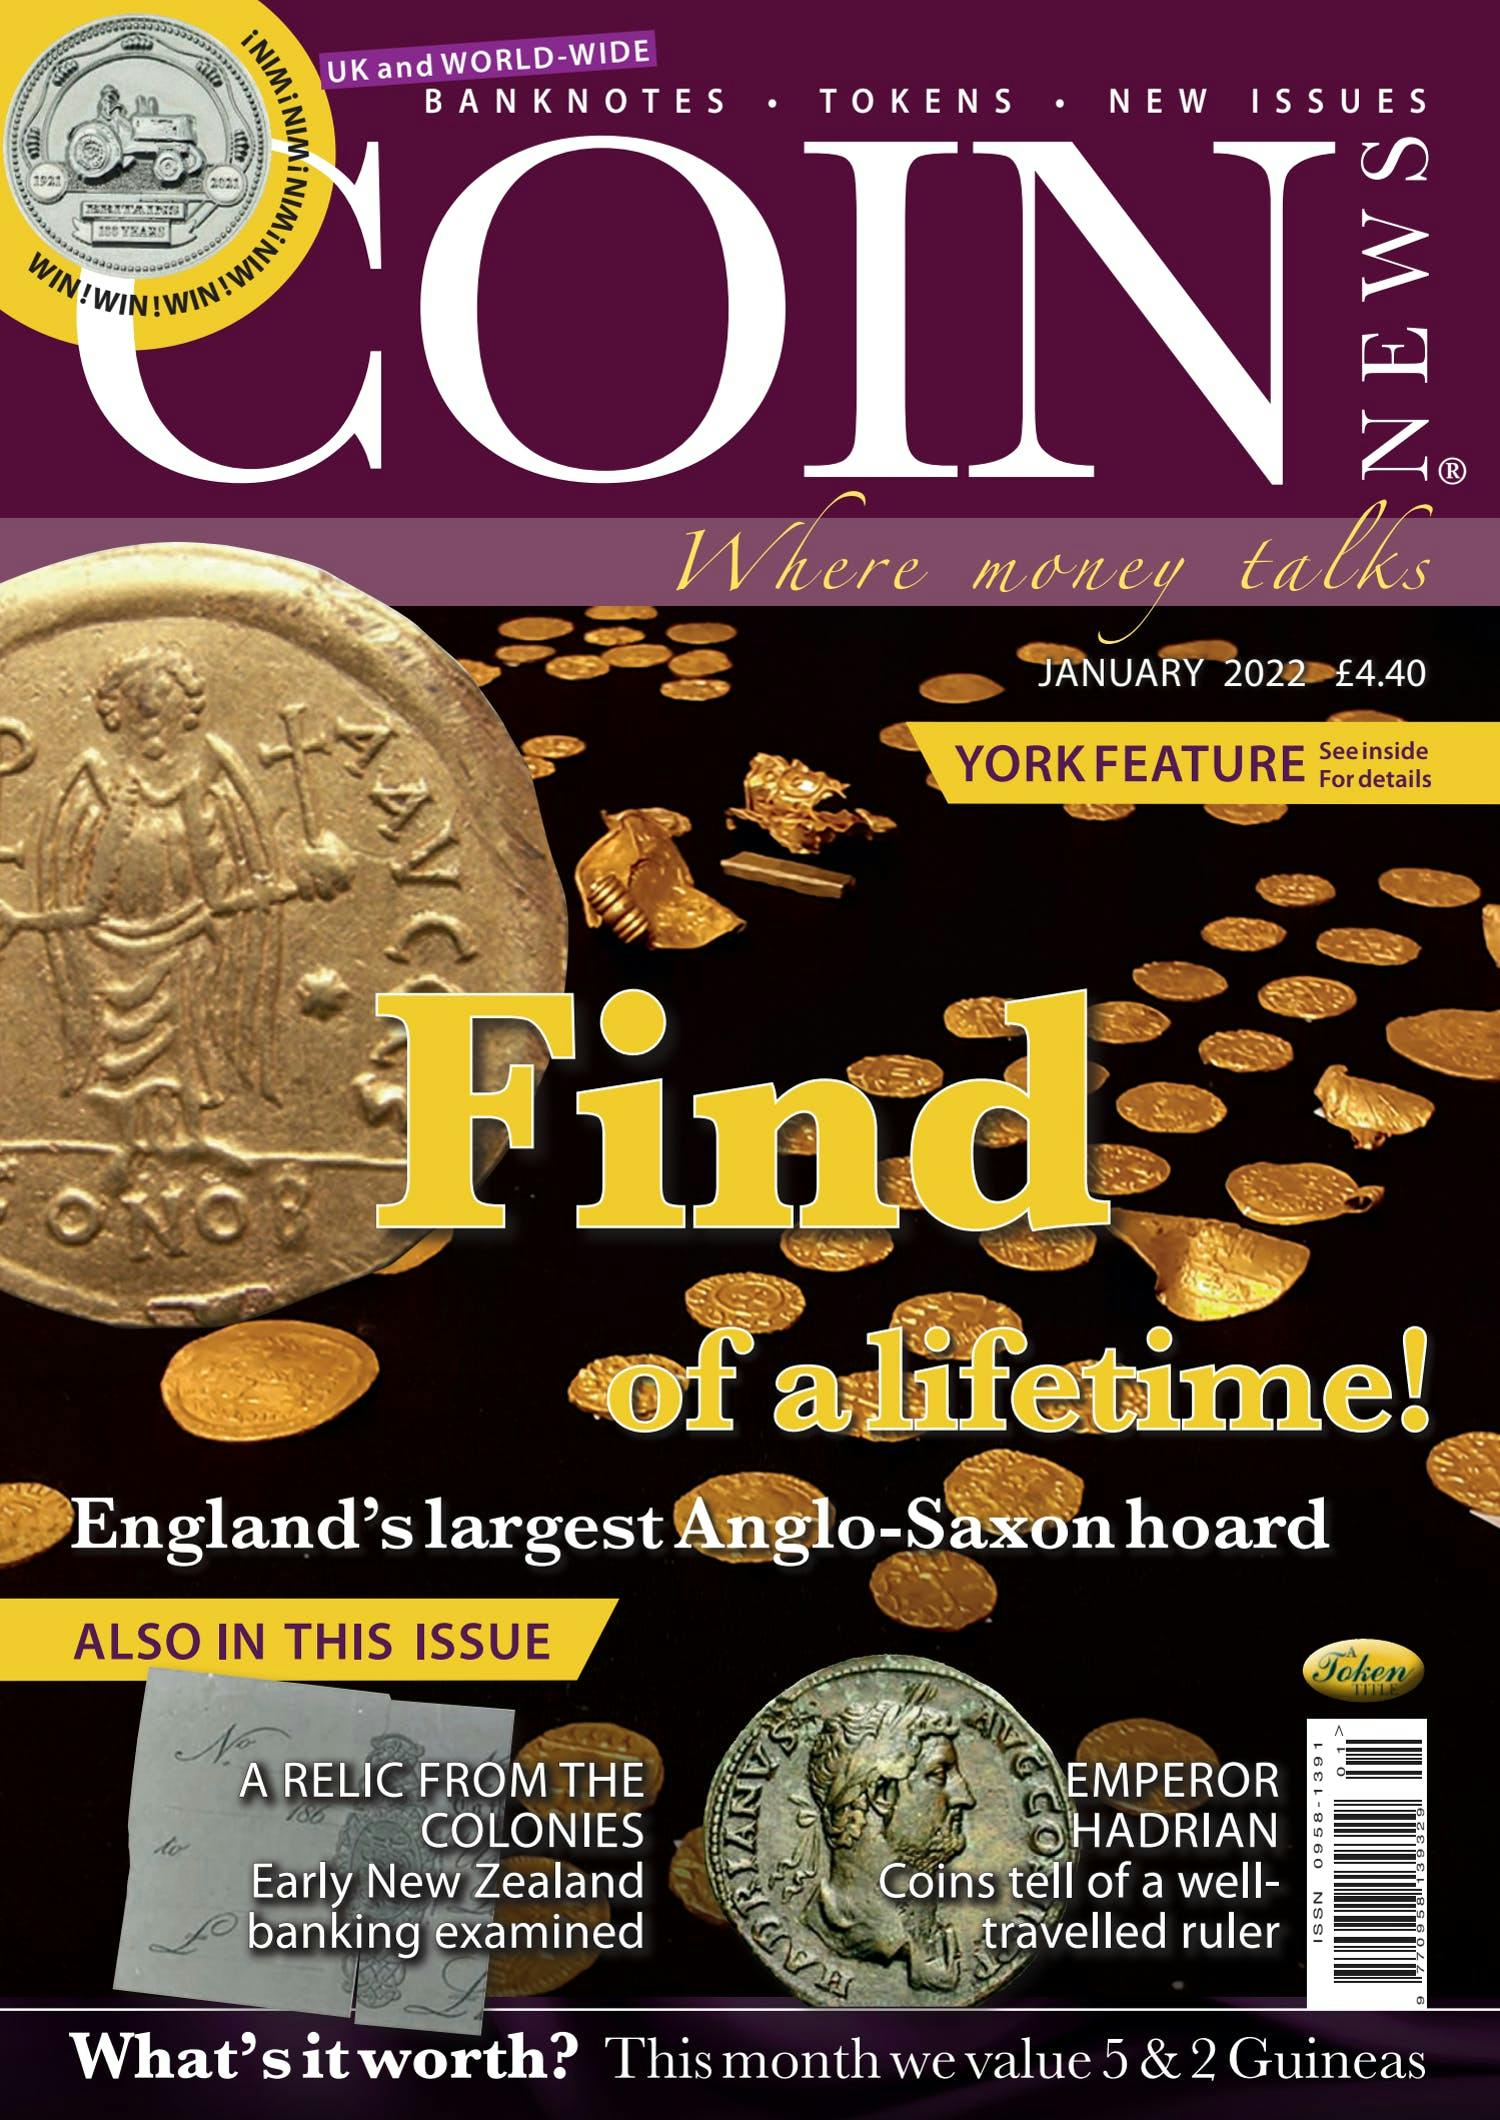 The front cover of Coin News, January 2022 - Volume 60, Number 1